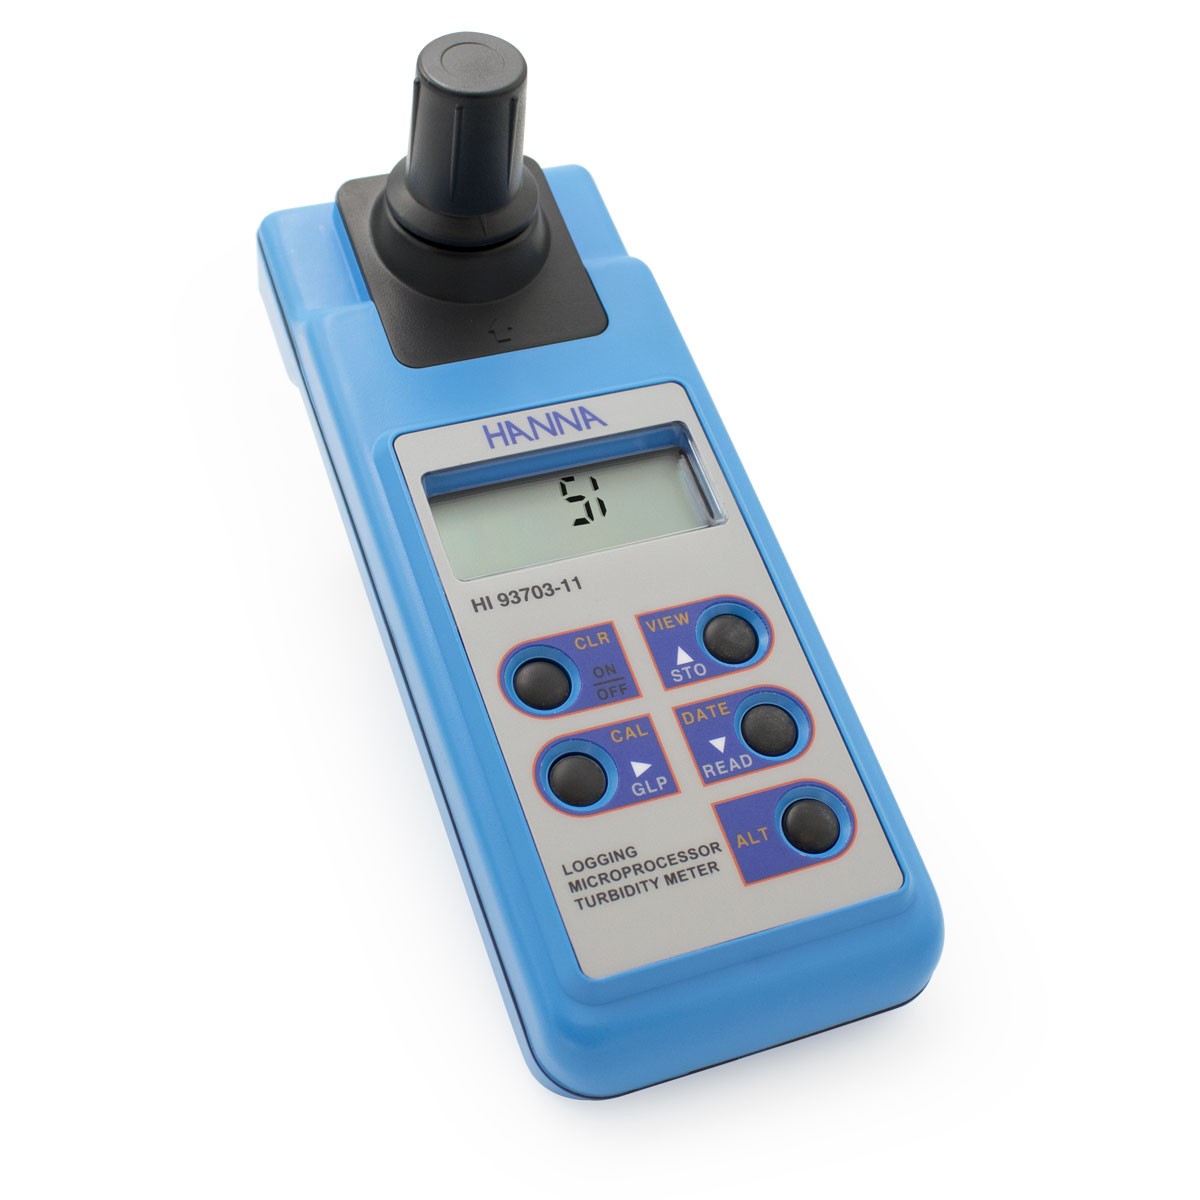 portable-iso-compliant-turbidity-meter-data-logging-and-pc-connectivity-hi93703-11.jpg